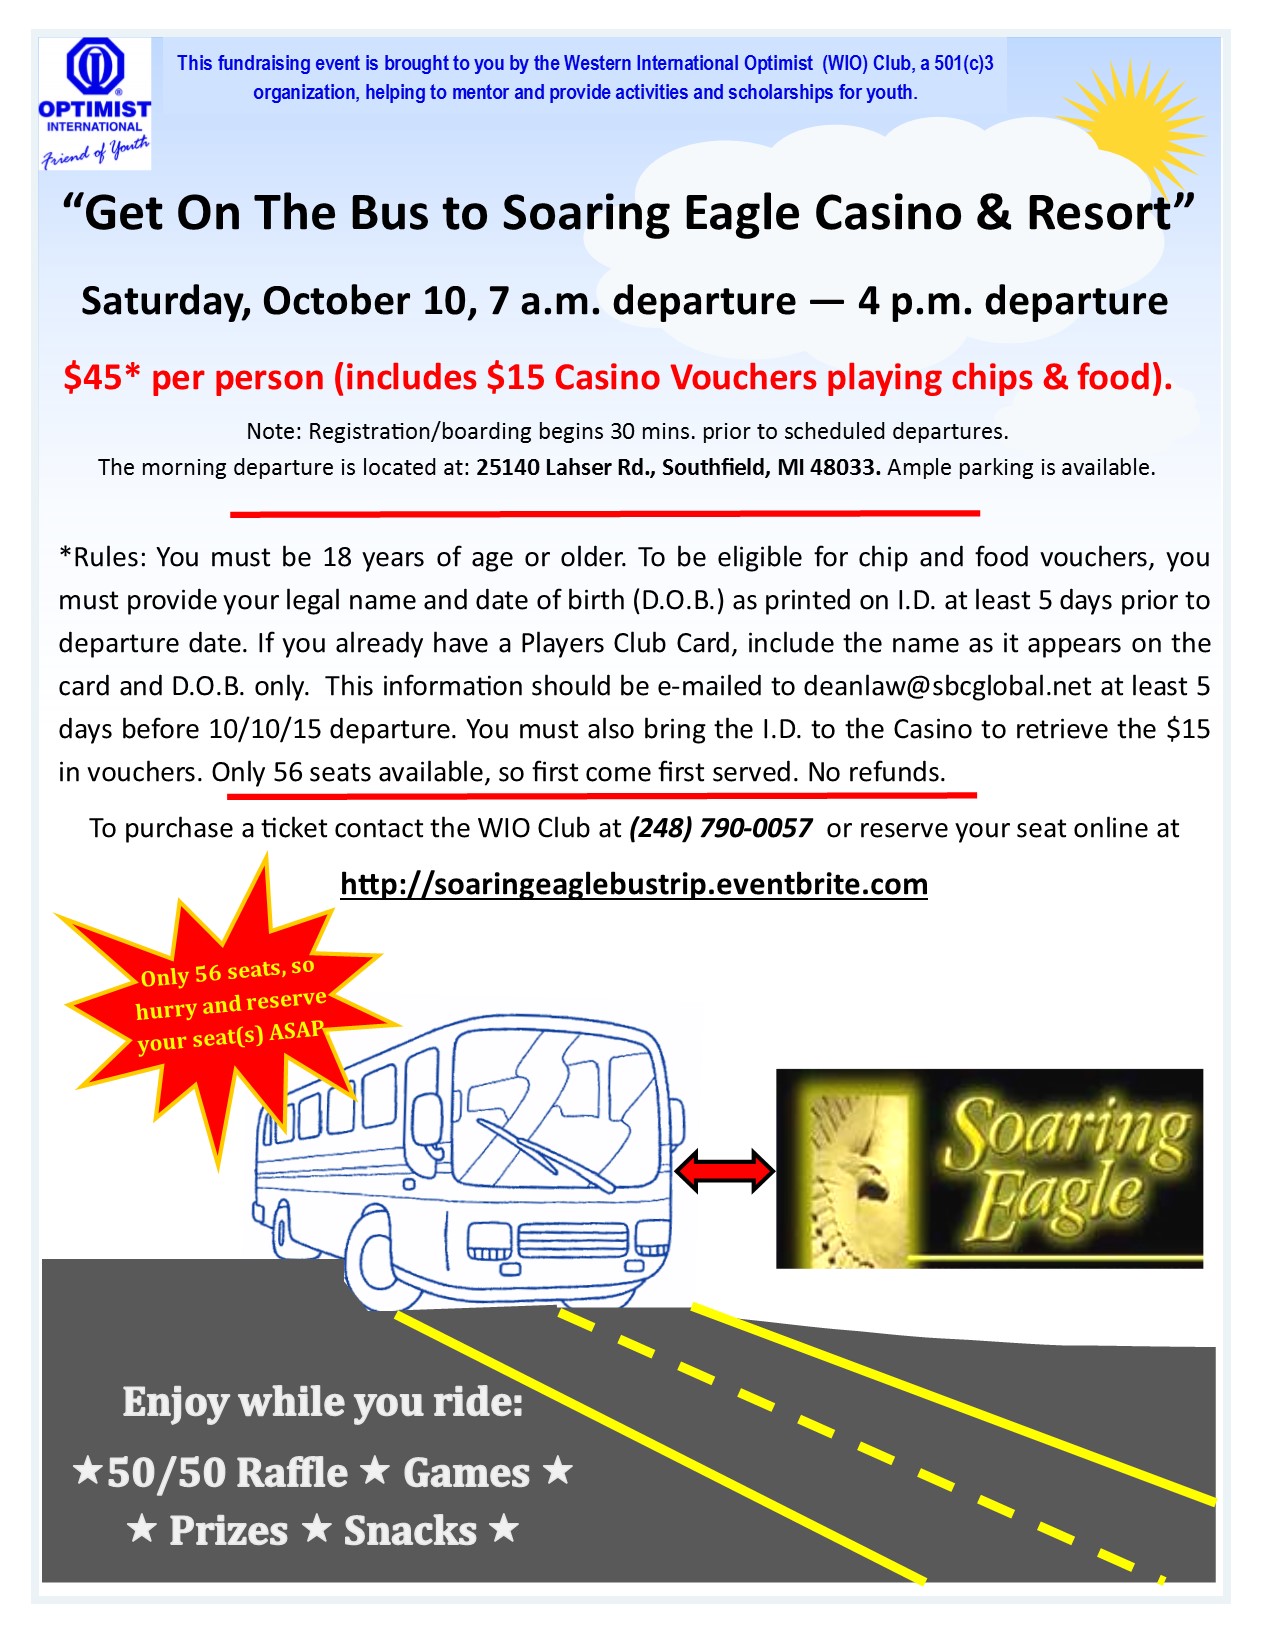 soaring eagle casino jobs positions available